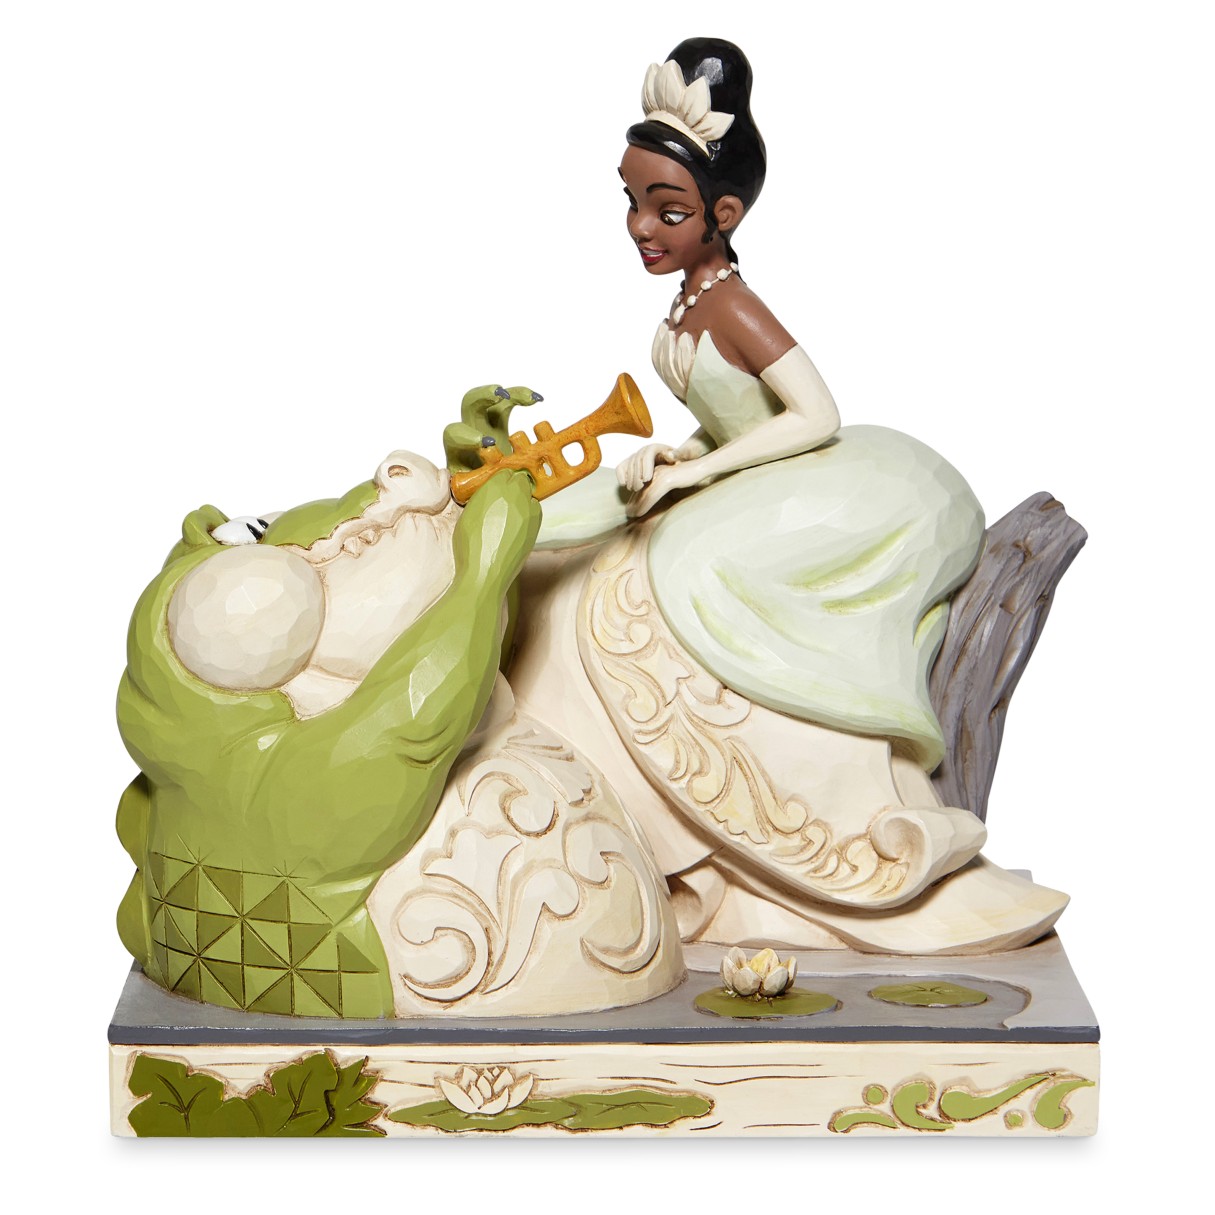 Tiana and Louis White Woodland Figure by Jim Shore – The Princess and the Frog